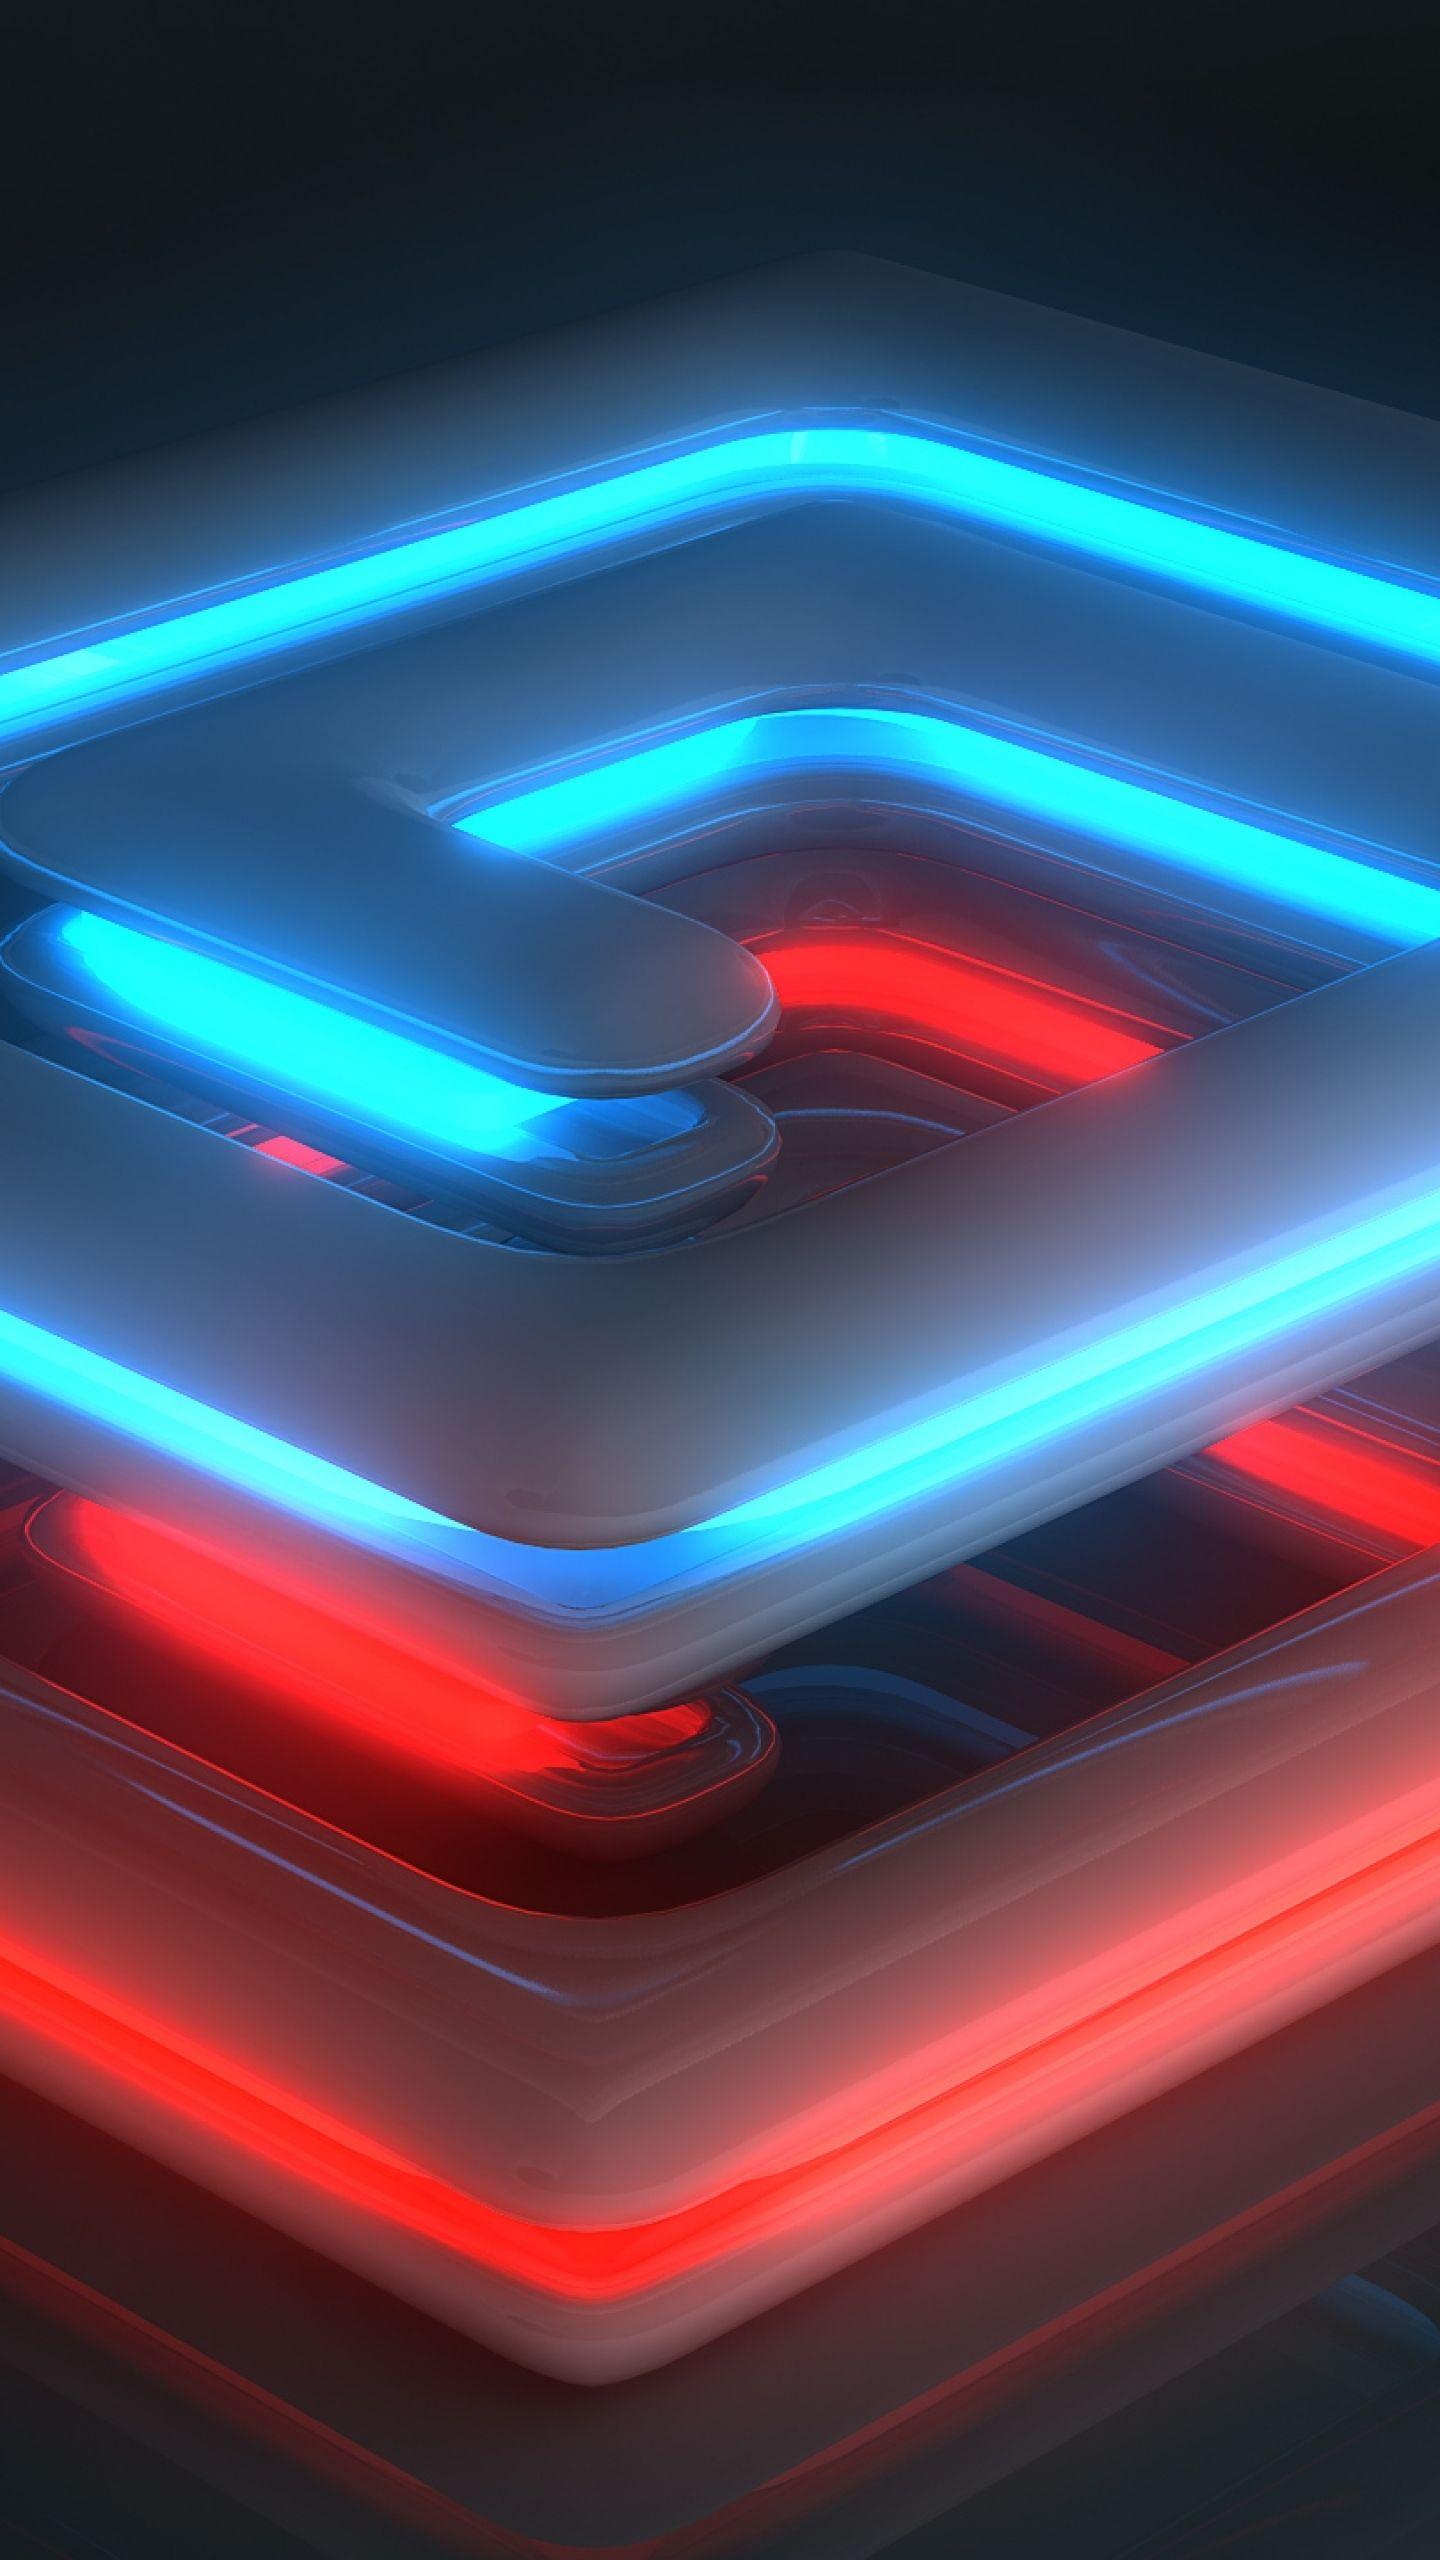 Download Wallpapers 1440x2560 Neon, Light, Spiral, Shape, Surface